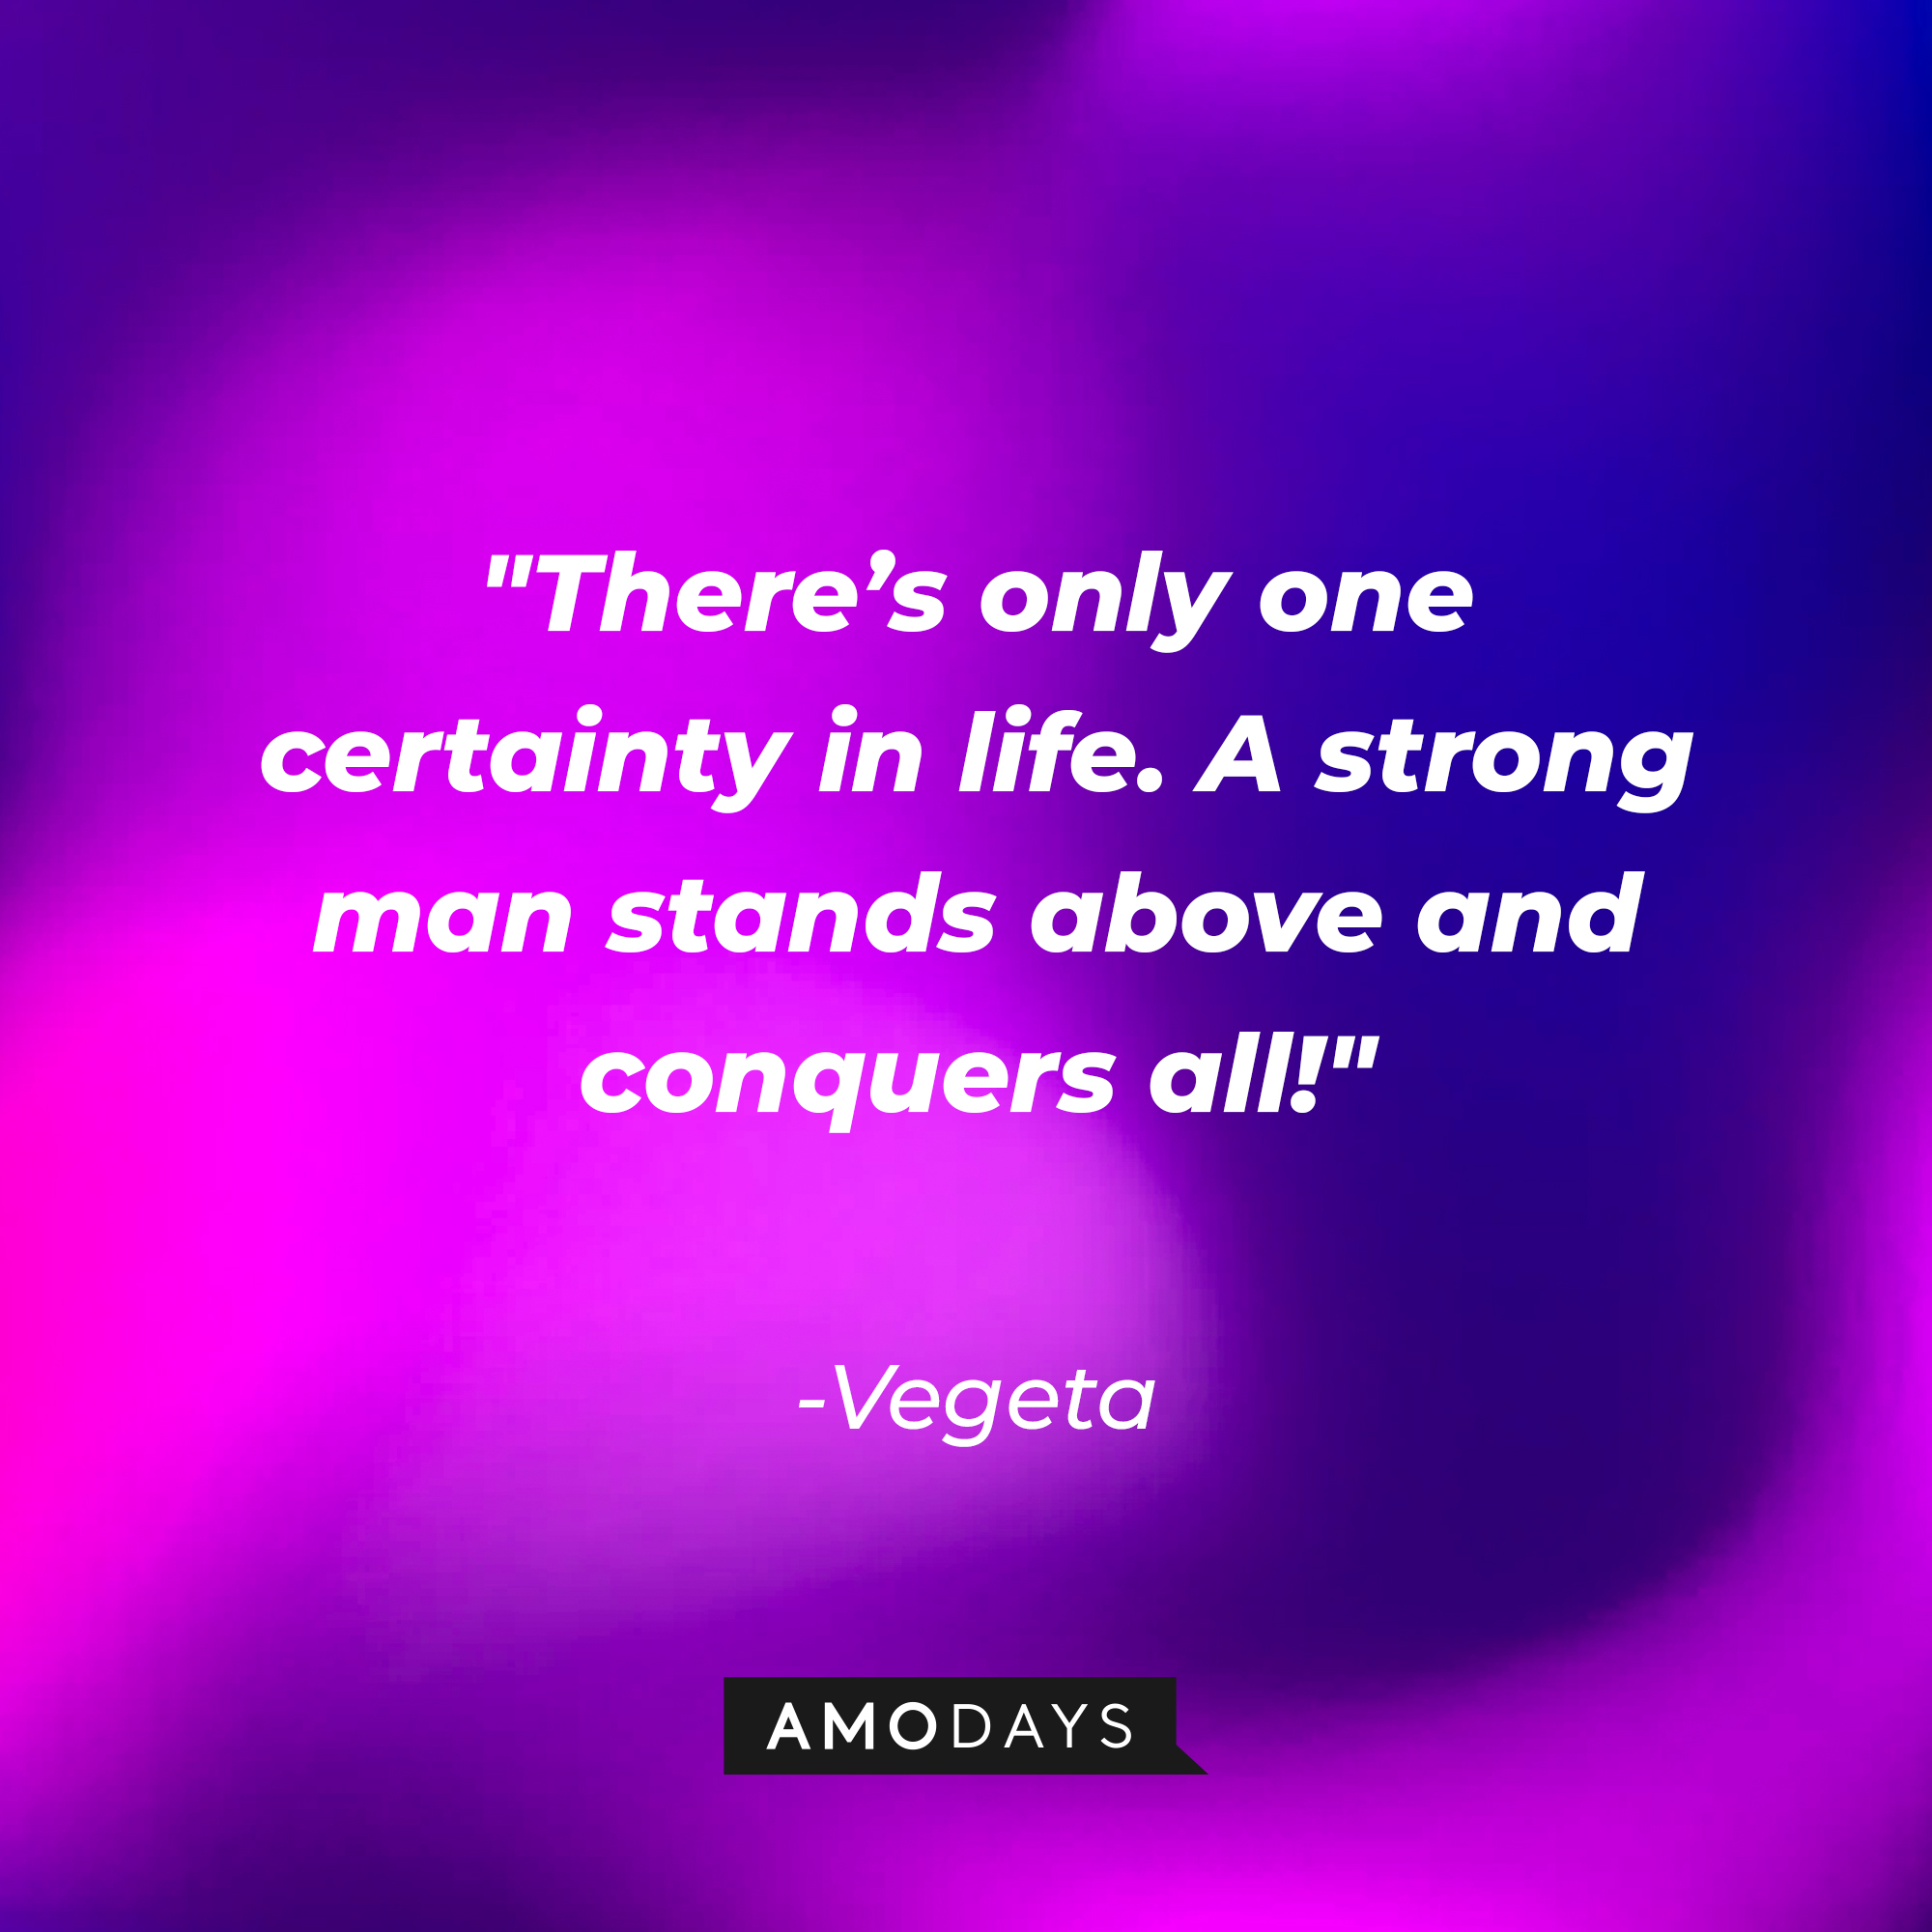 Vegeta's quote: "There’s only one certainty in life. A strong man stands above and conquers all!" | Source: Amodays